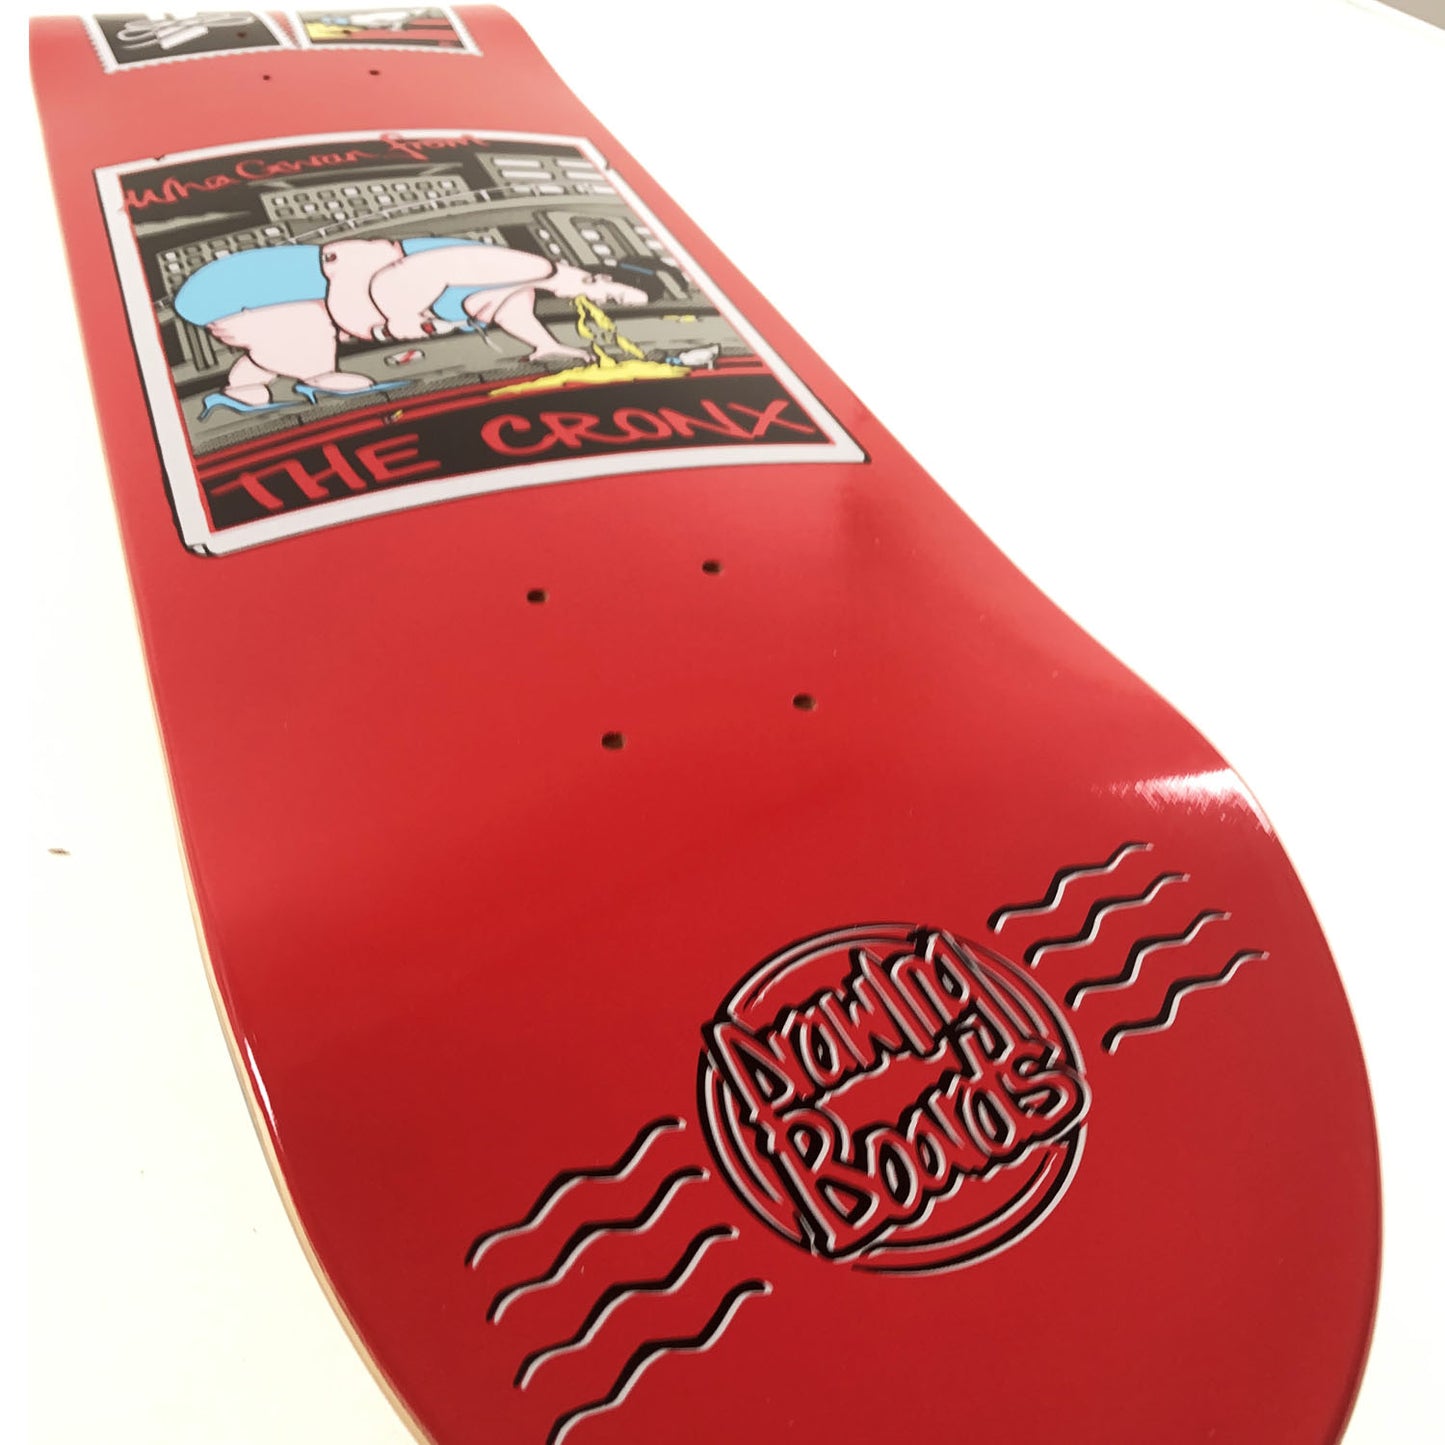 The Drawing Boards - 8.0" - Postcards - Cronx Deck - Prime Delux Store